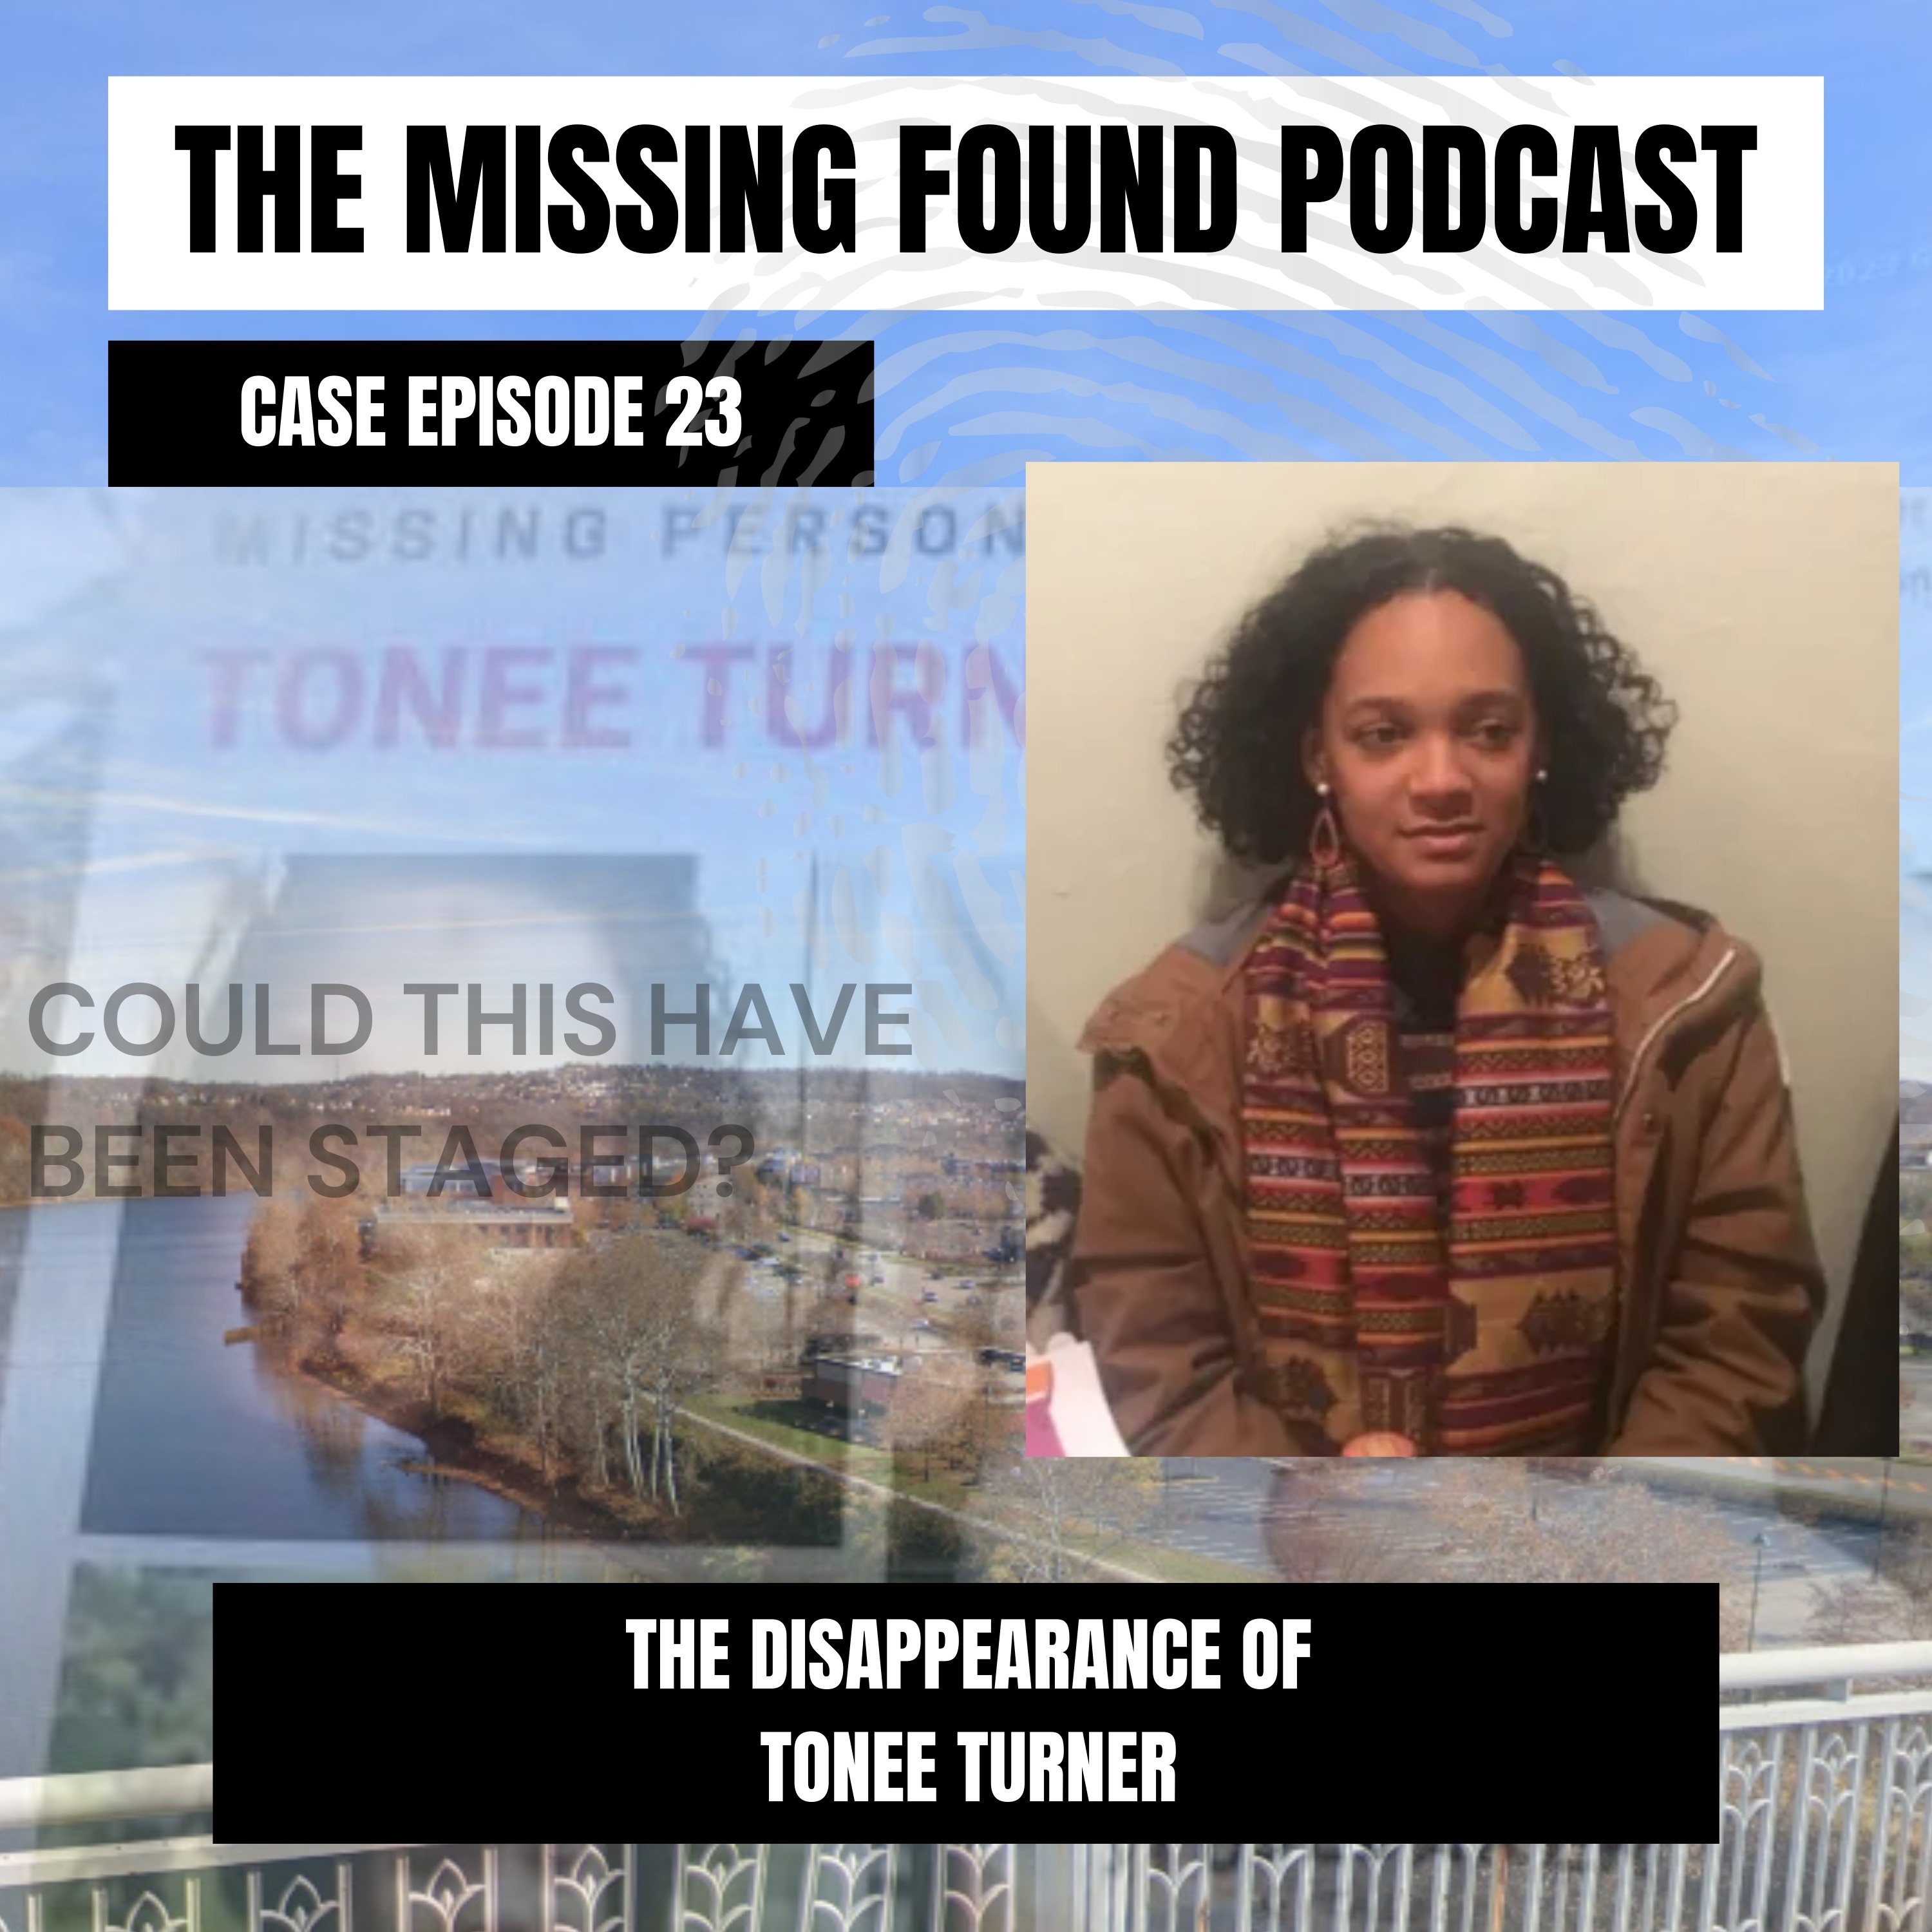 Case Episode 23 | Tonee Turner: Her Disappearance May Have Been Staged as a Suicide